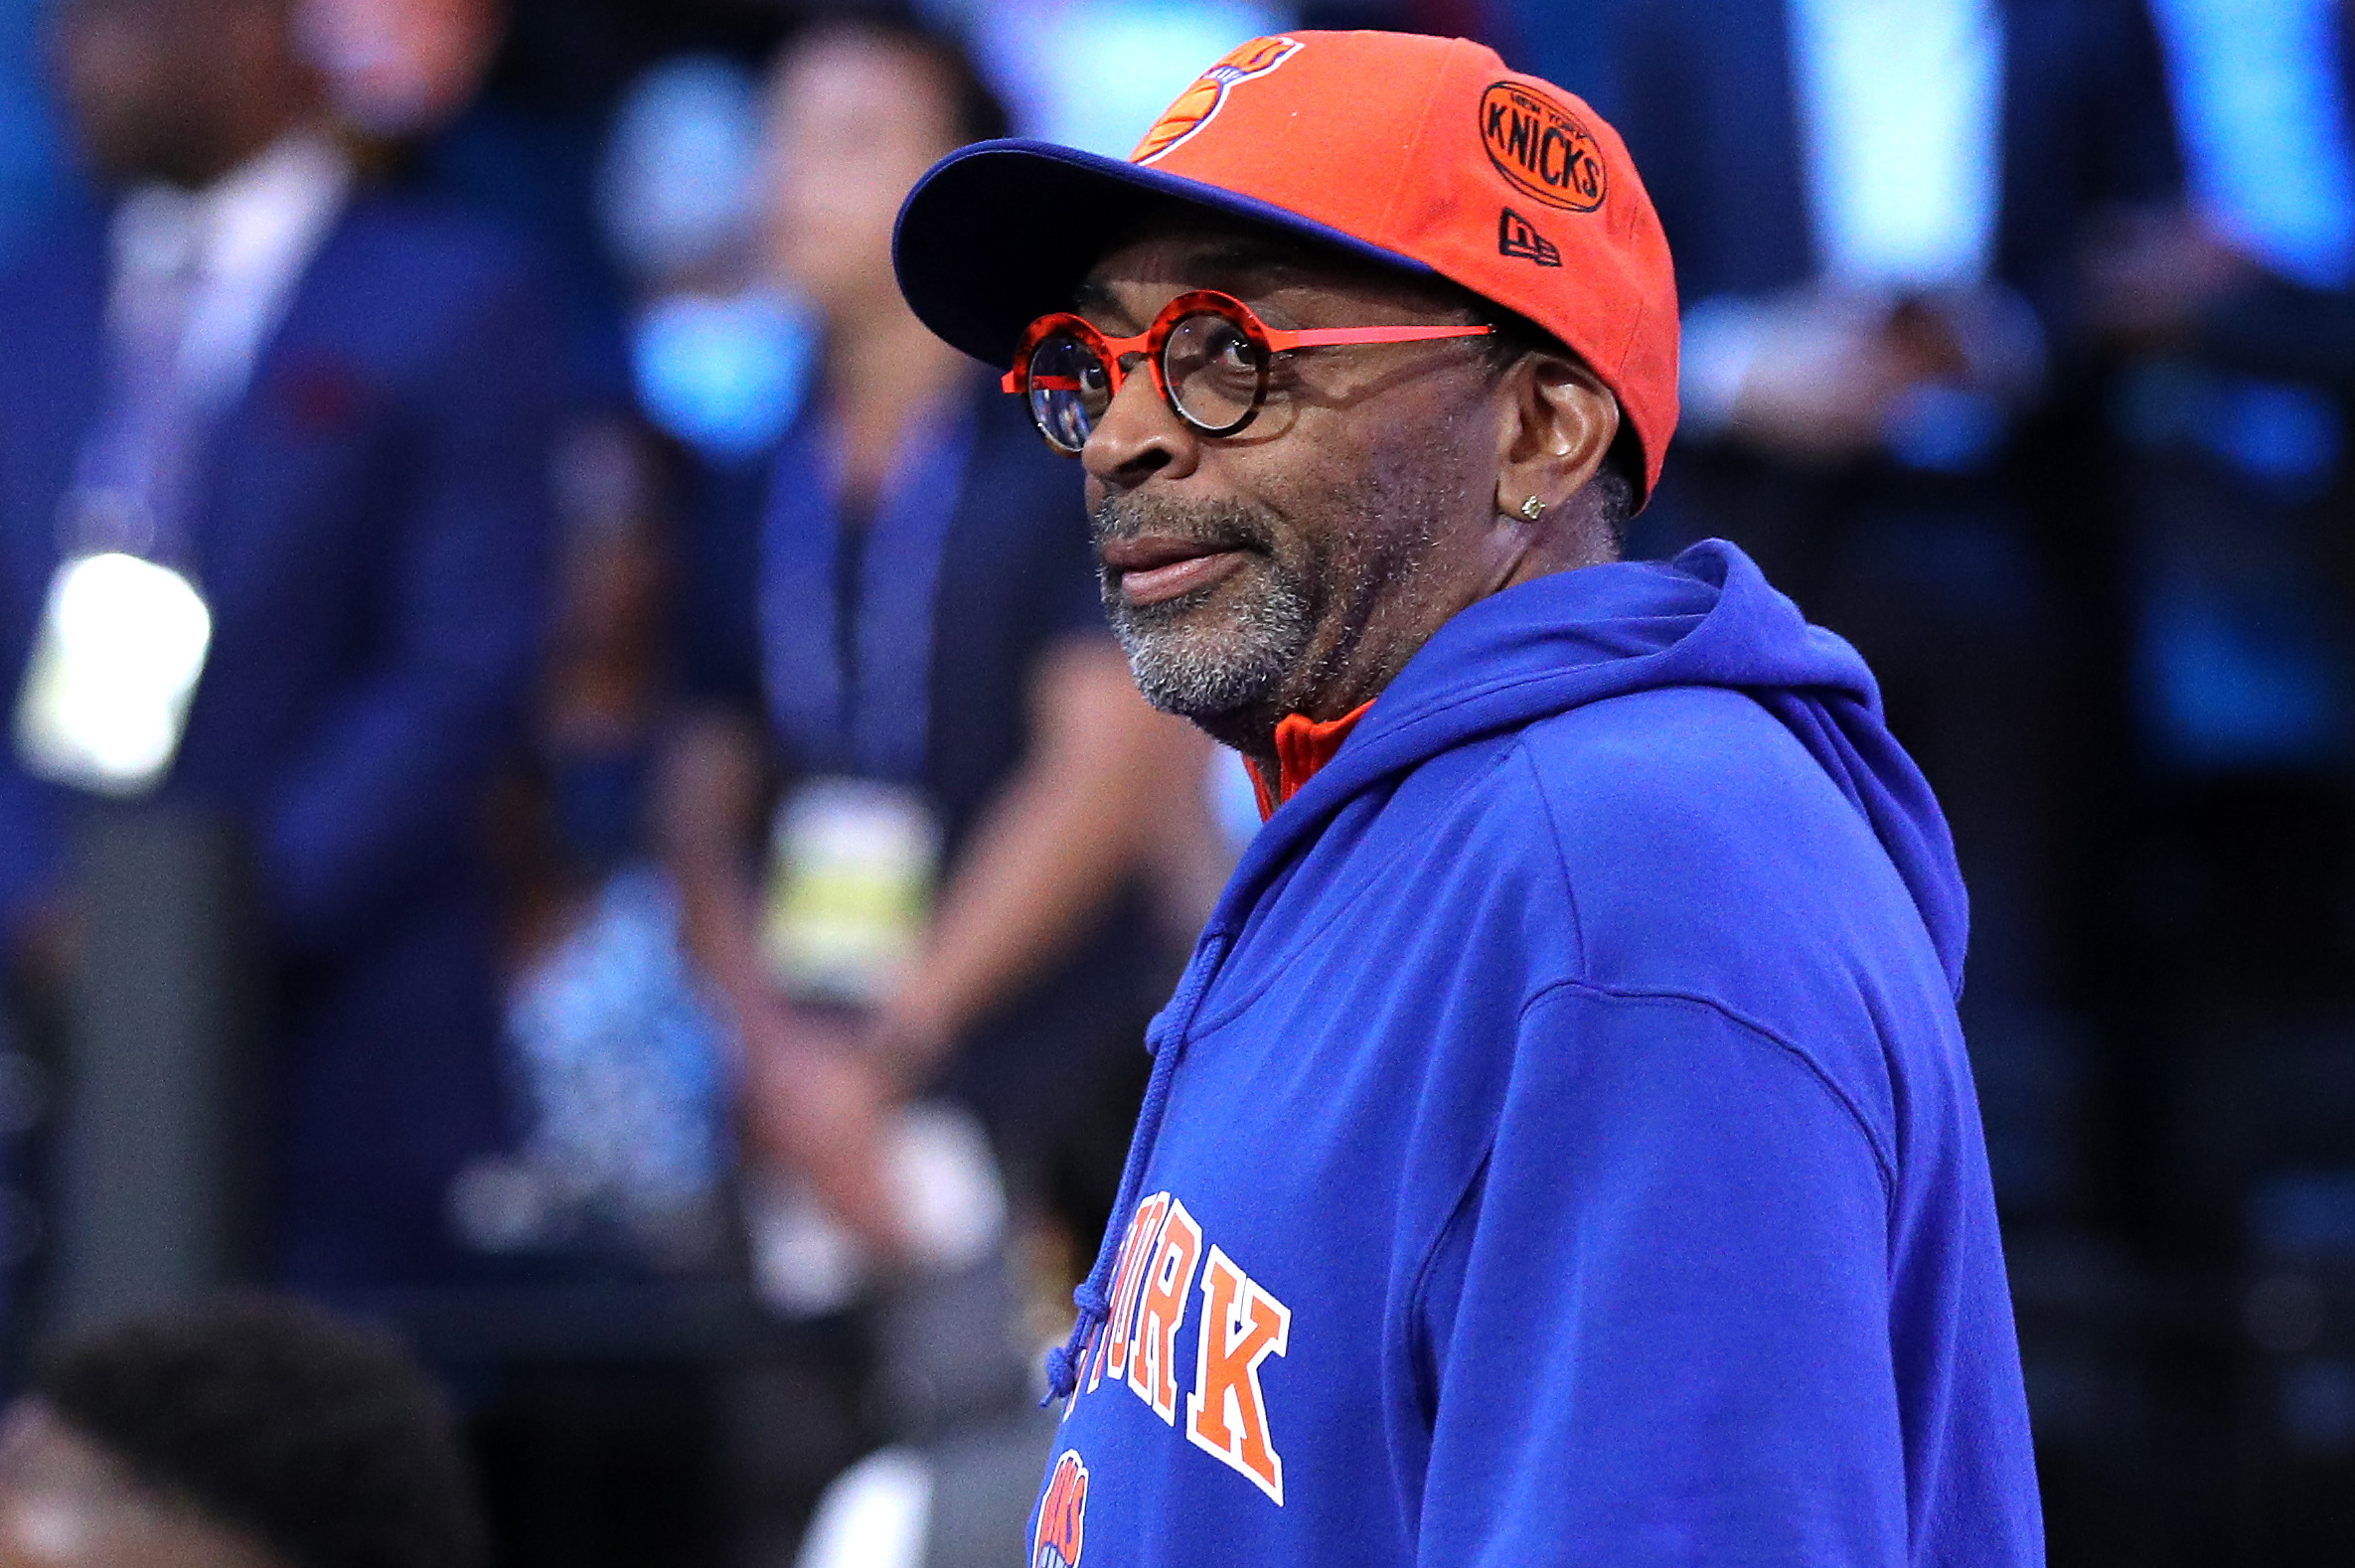 Spike Lee Feuds With Knicks Over Security Stop